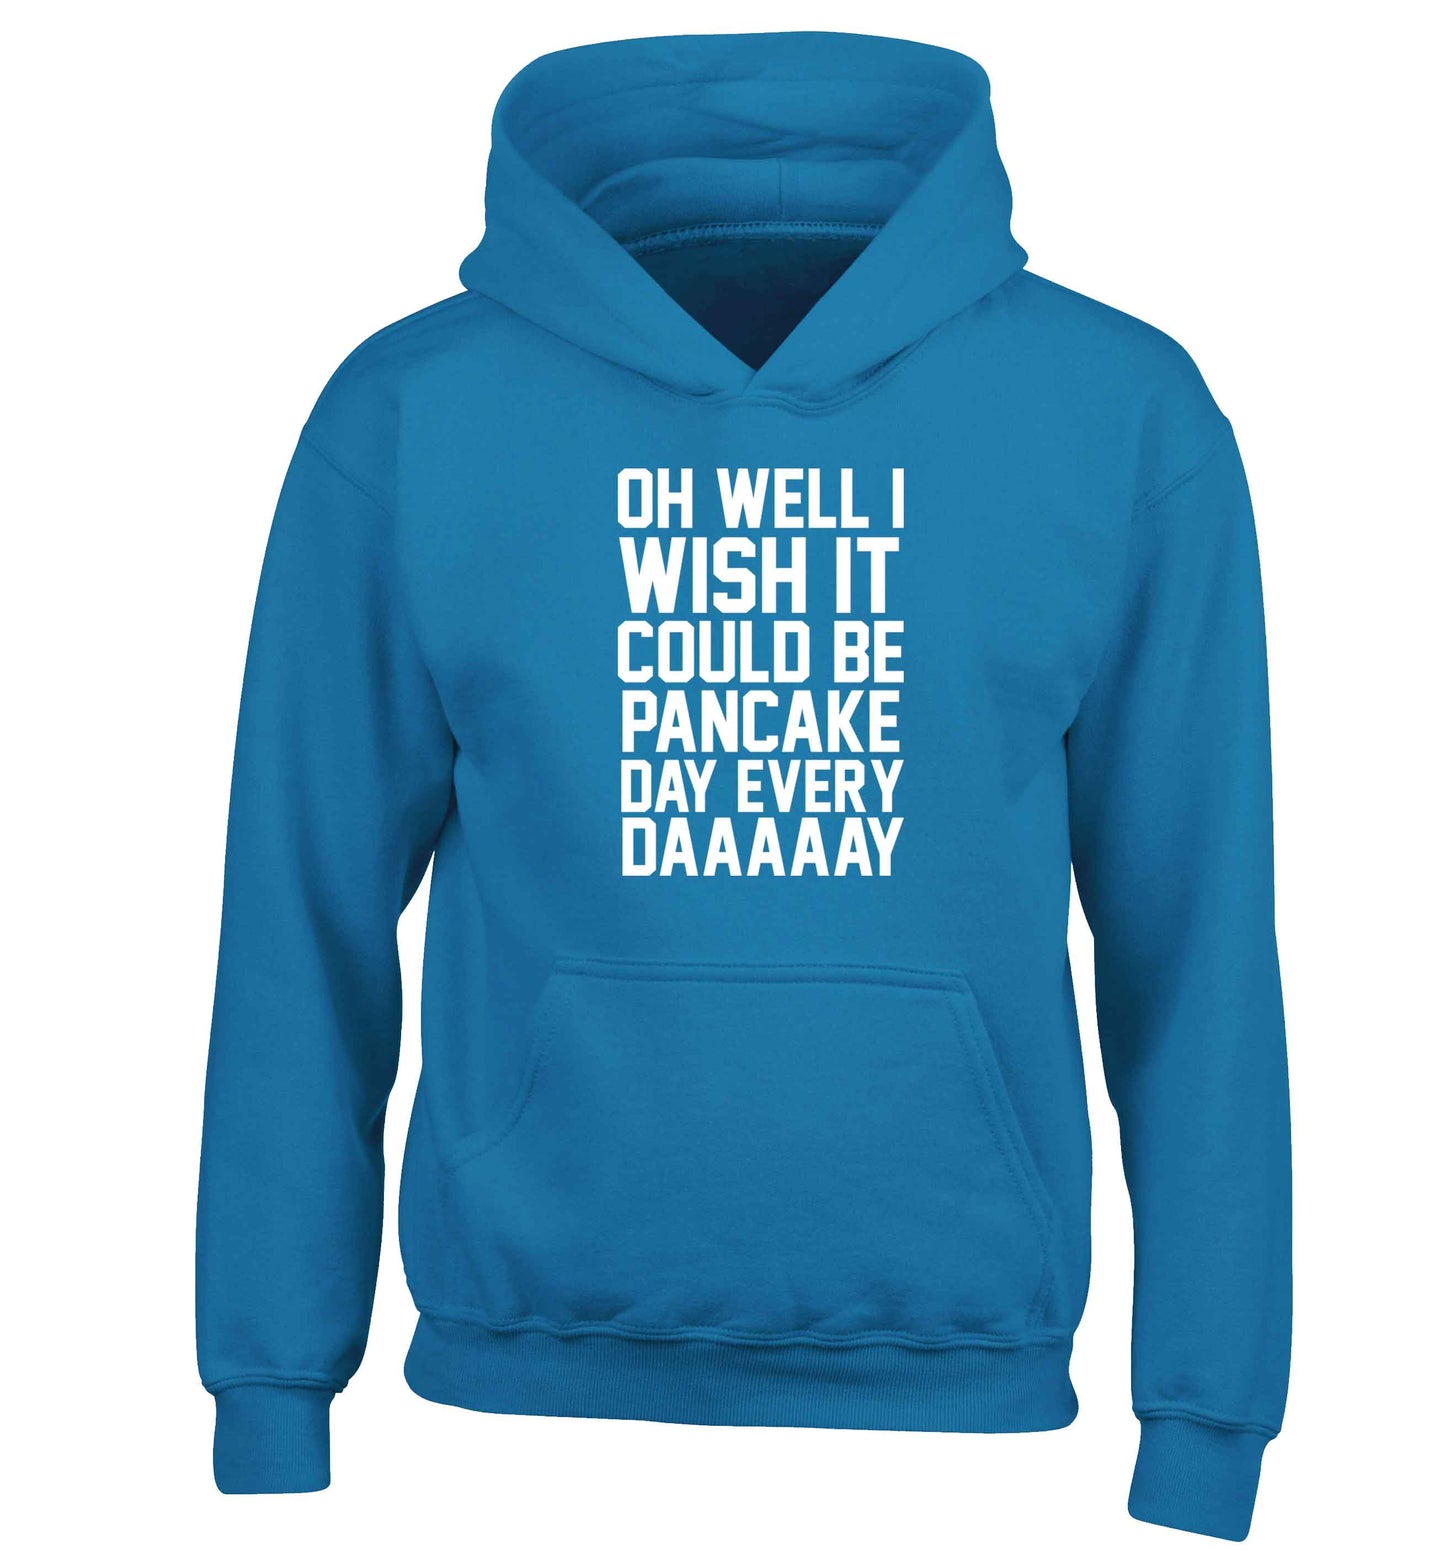 Oh well I wish it could be pancake day every day children's blue hoodie 12-13 Years